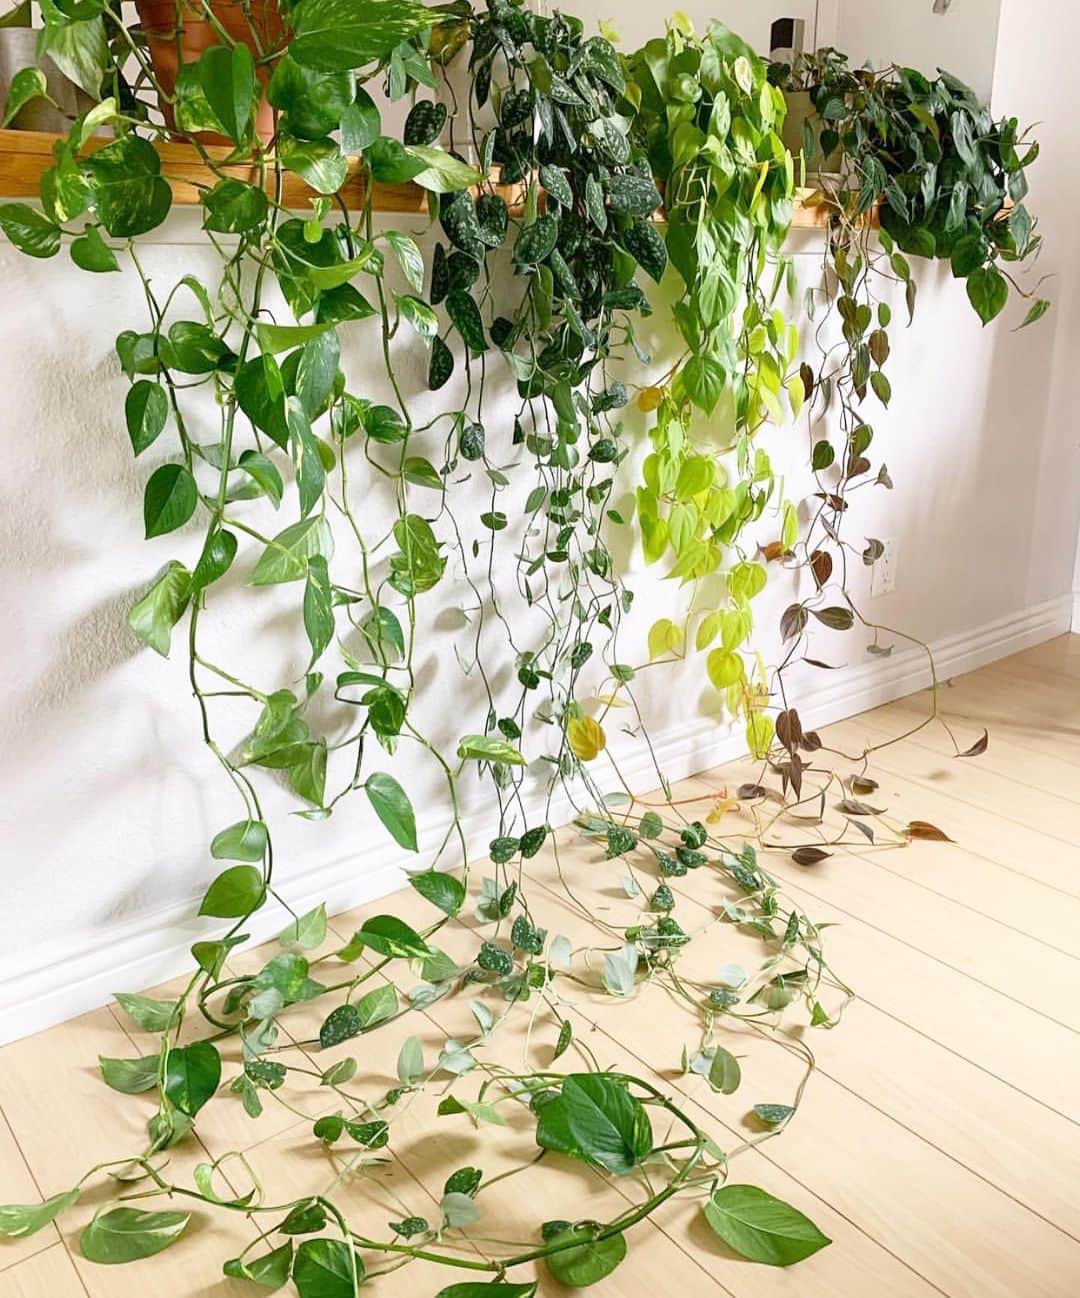 The Louunのインスタグラム：「Which one is your favorite pothos? We have so many options 😊🌿Shop now: www.etsy/shop/plantroomla #pothos #plants #plantdecor #saturday #plantsofinstagram」